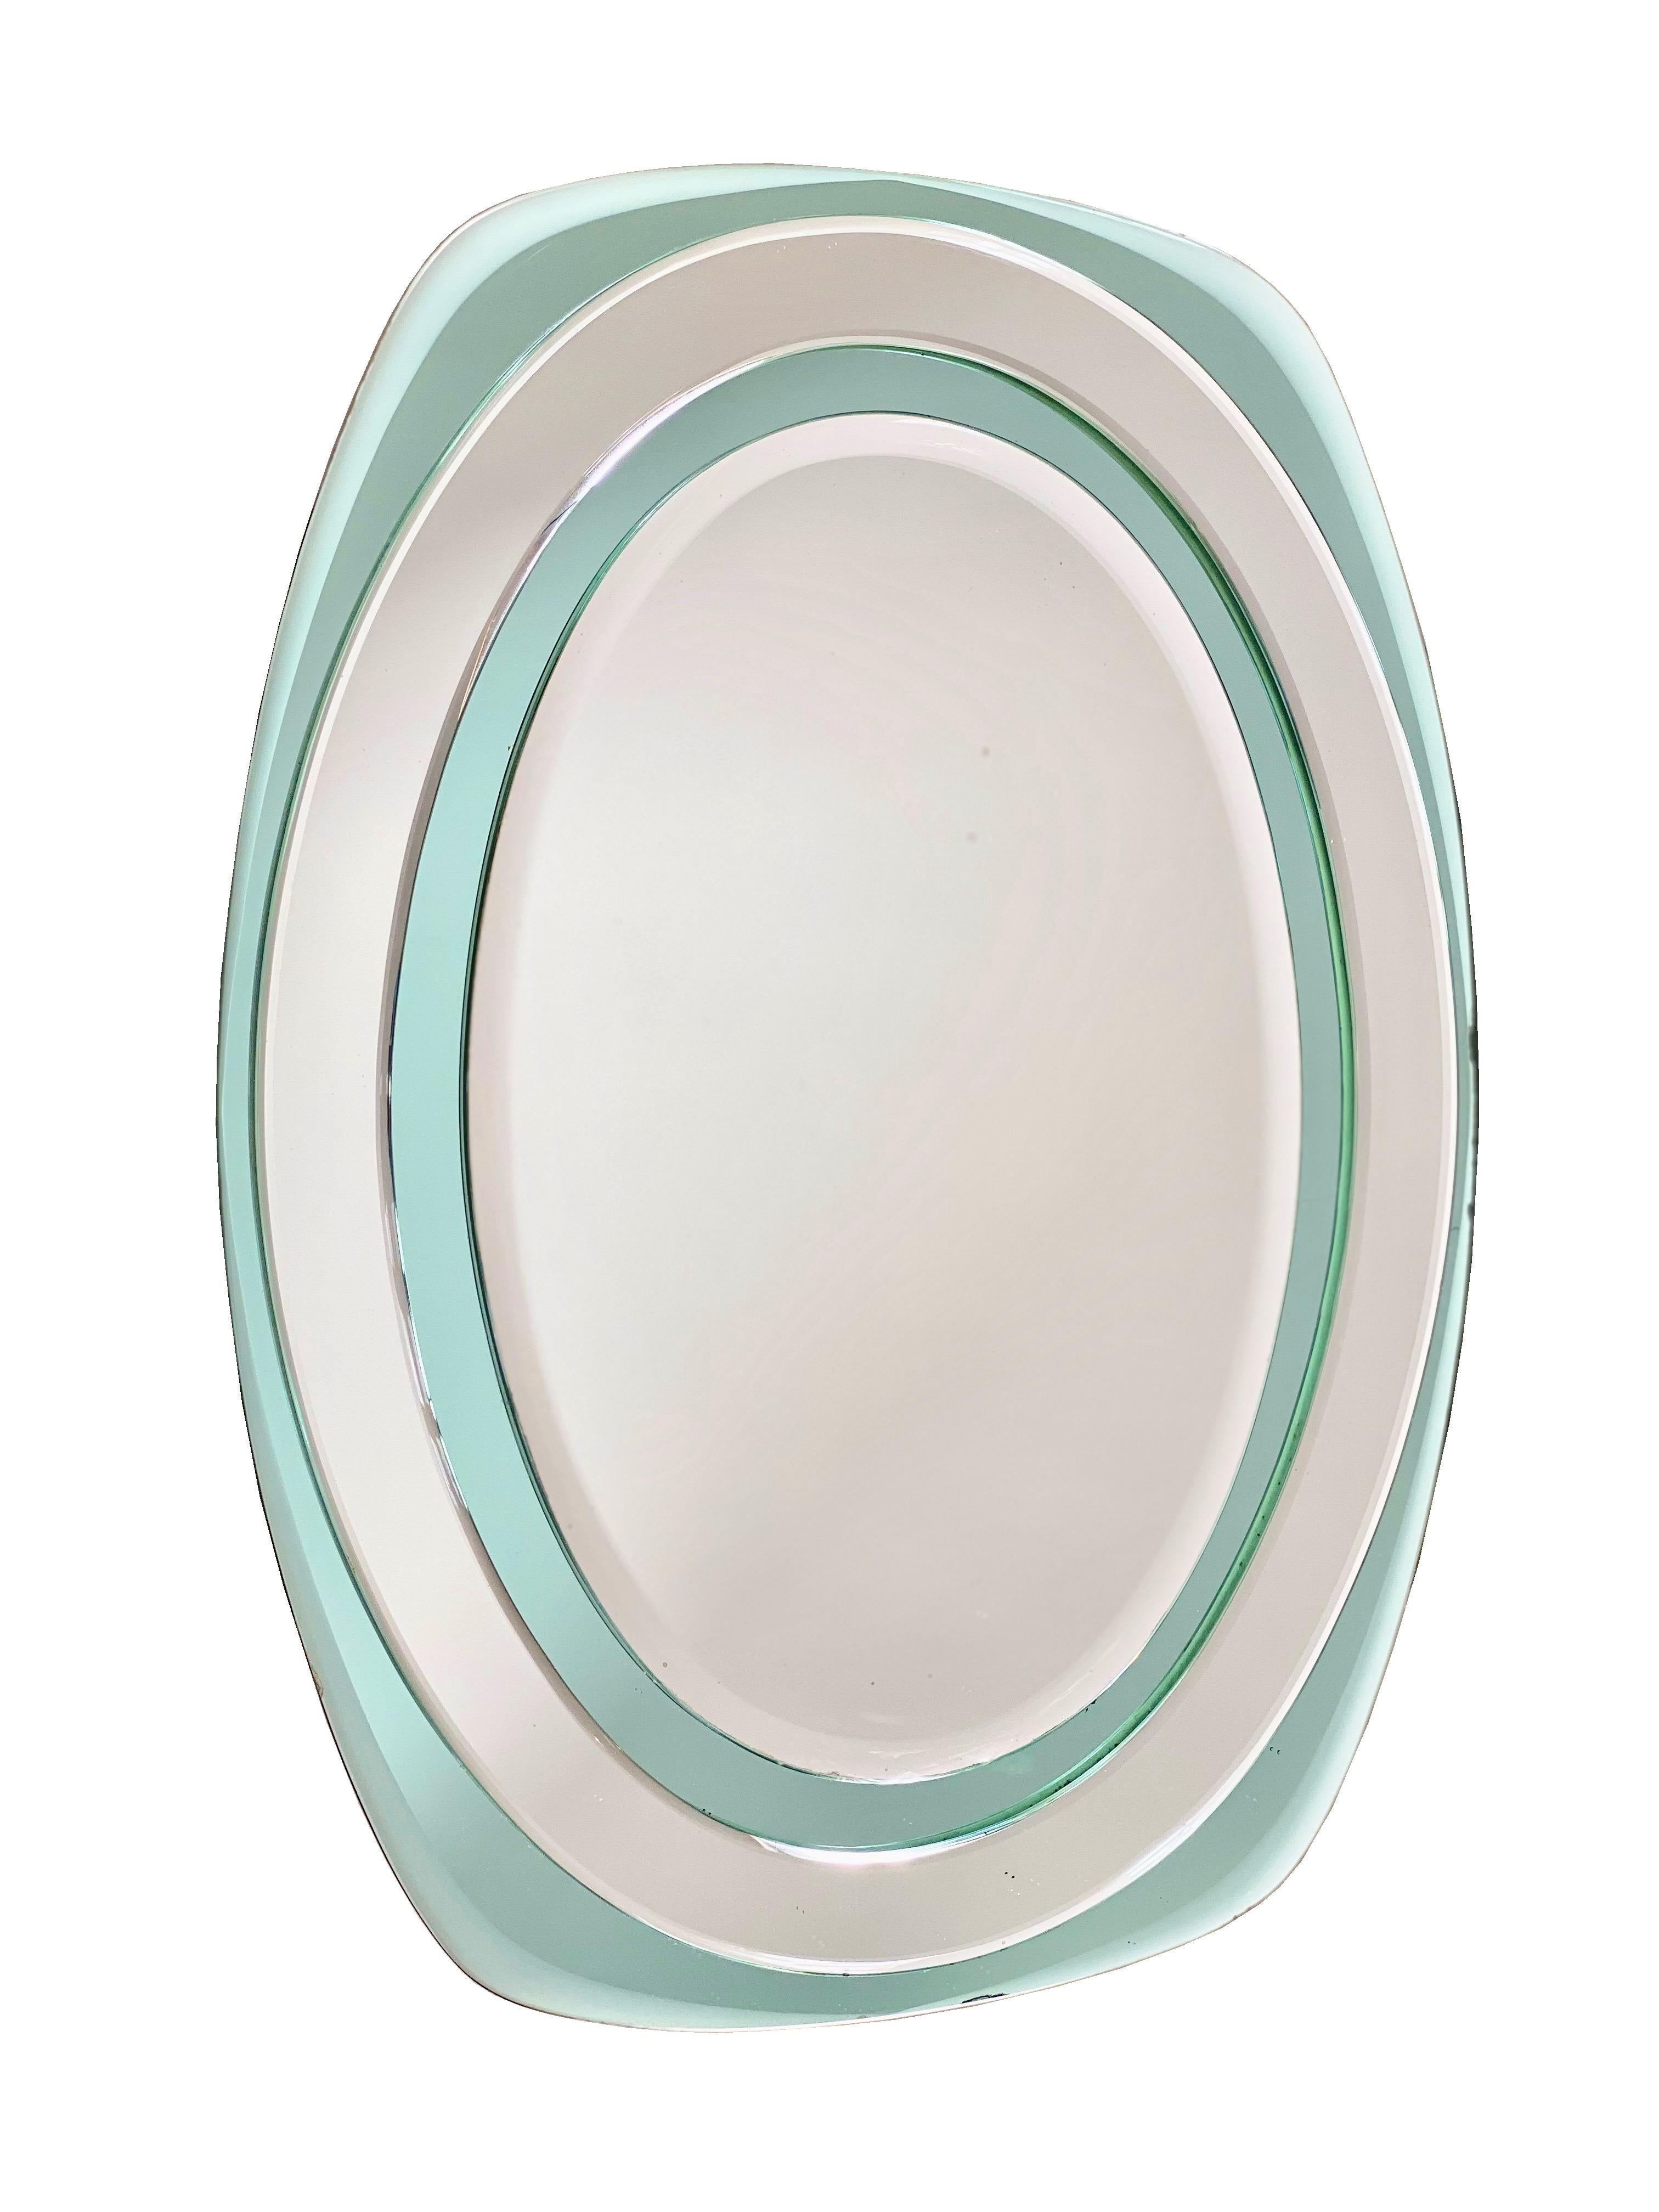 Wall mirror with blue-green details, by Cristal Art, Italy, circa 1960.